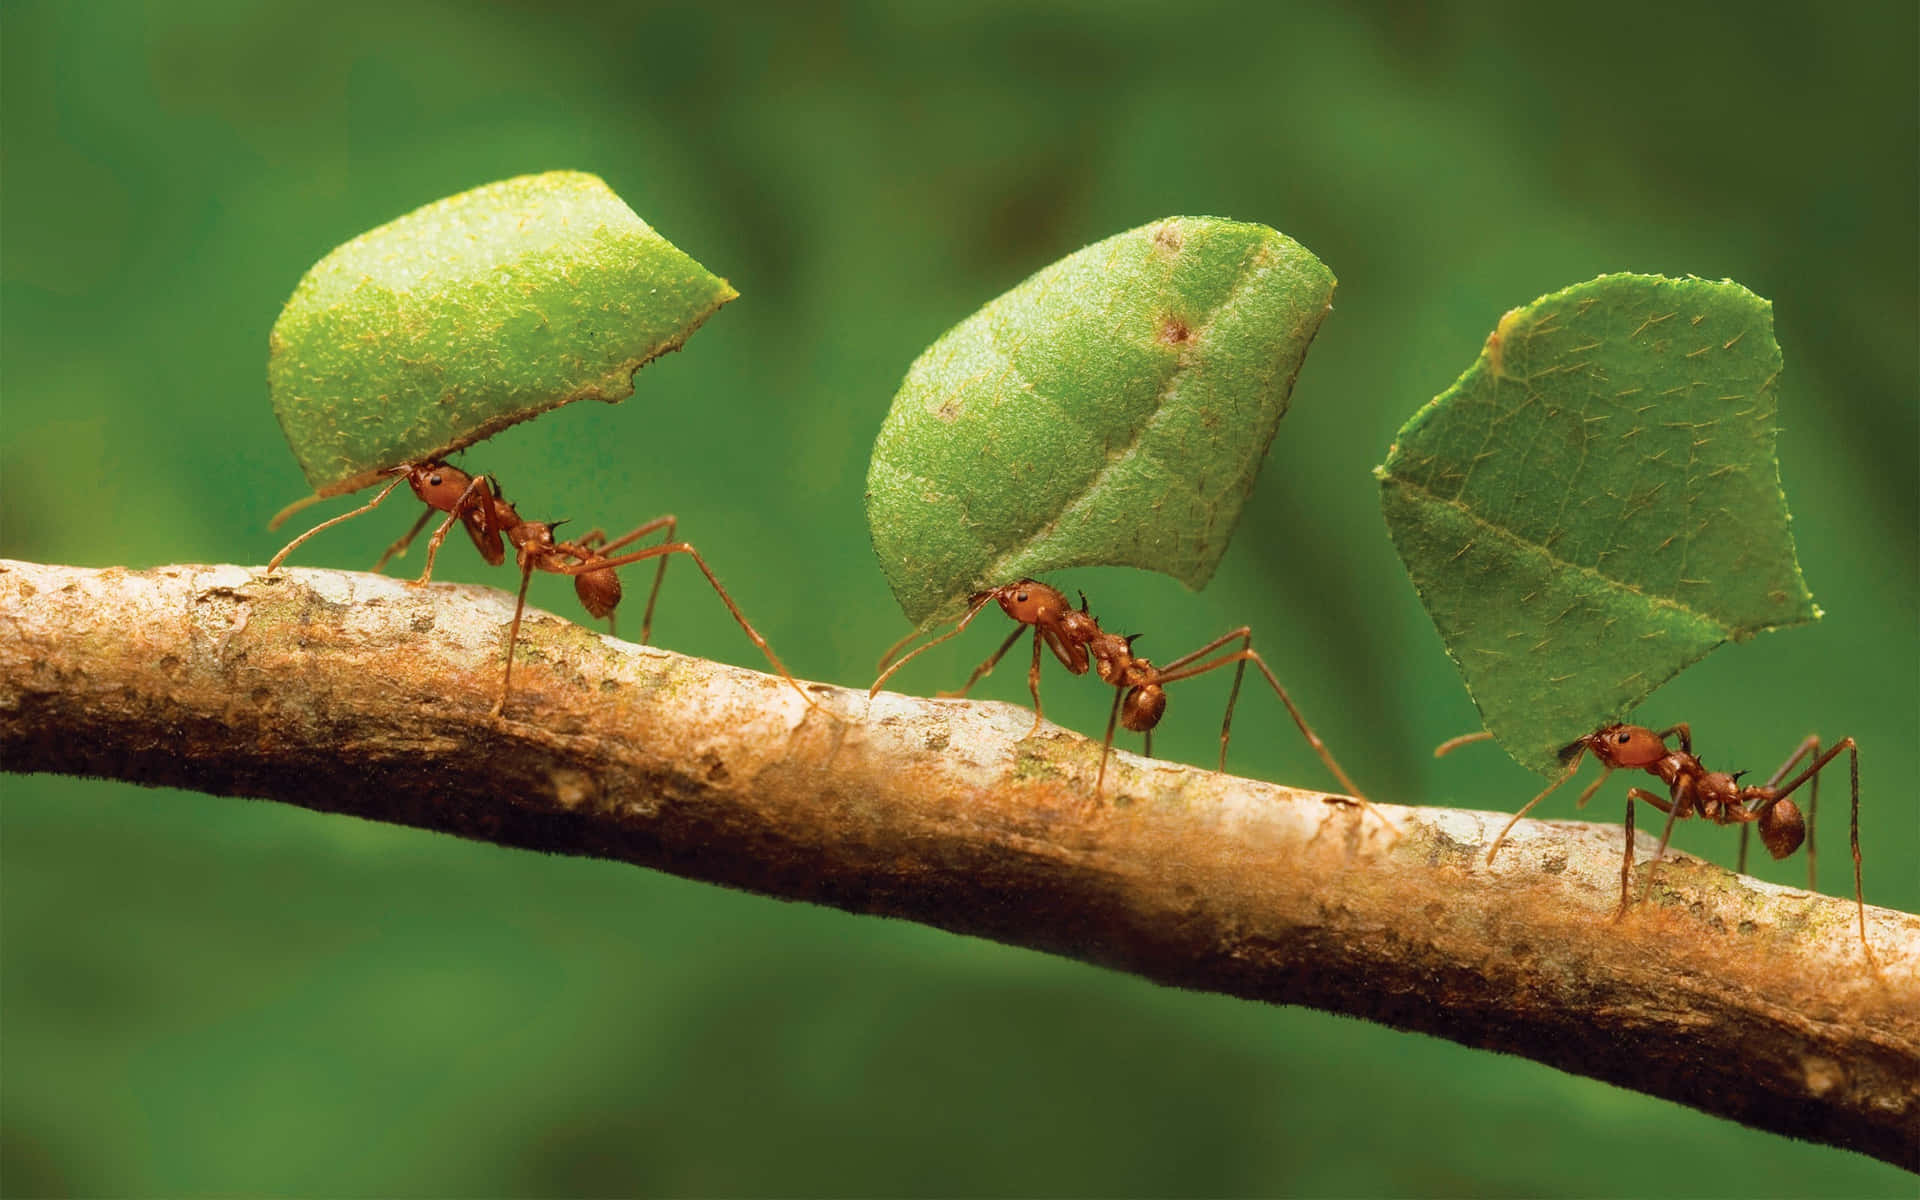 The Red Ants Insects Wallpaper